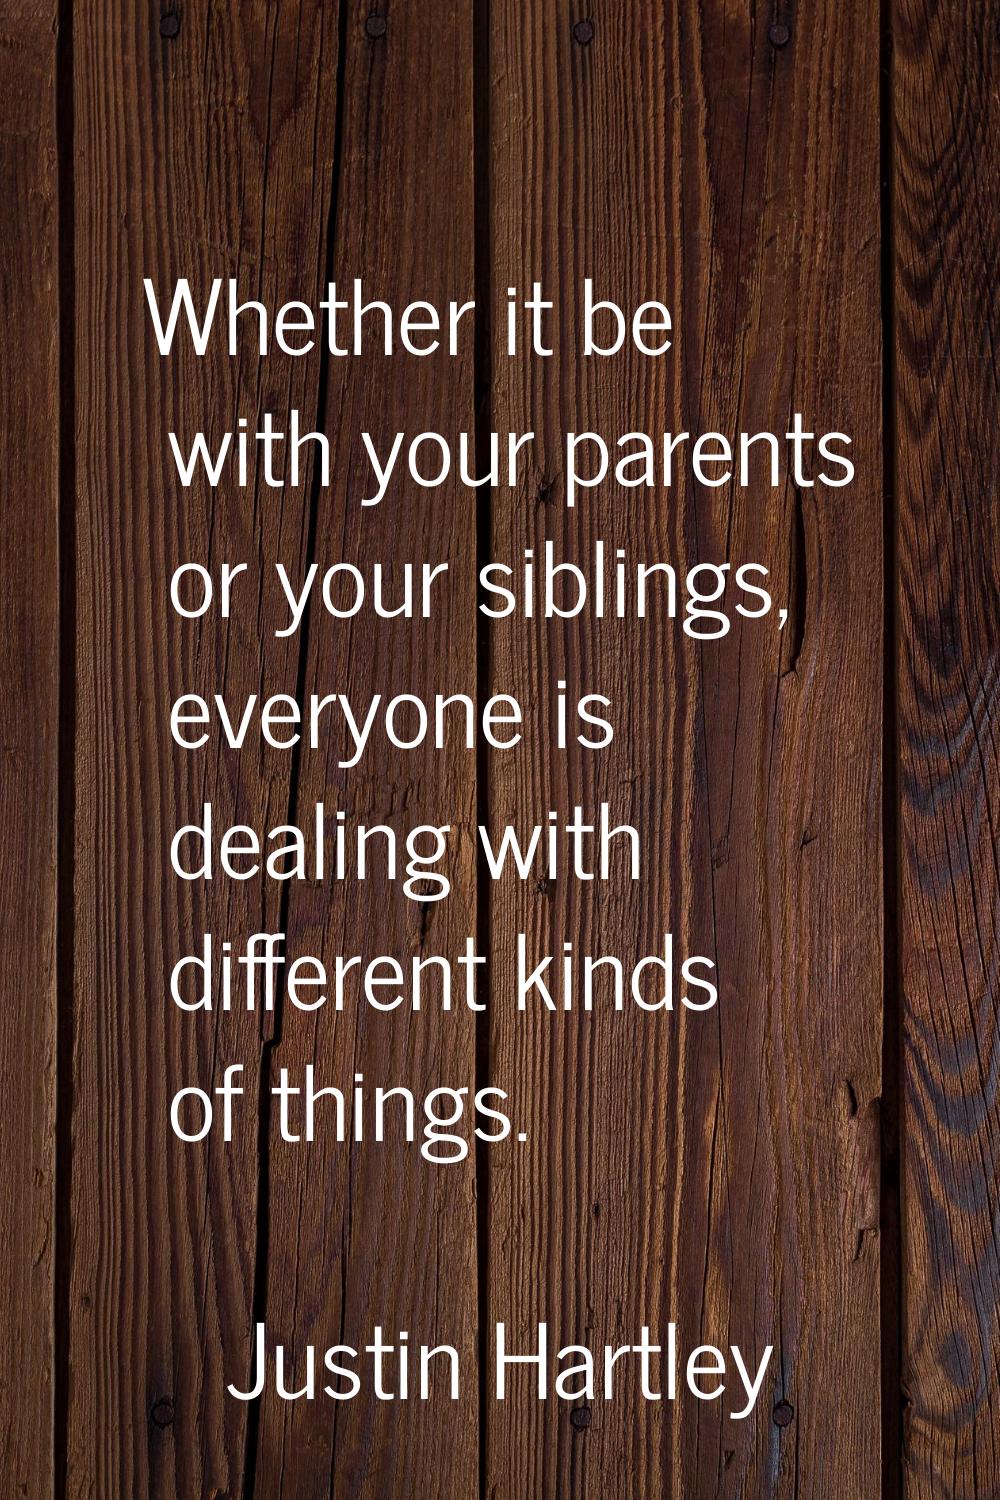 Whether it be with your parents or your siblings, everyone is dealing with different kinds of thing